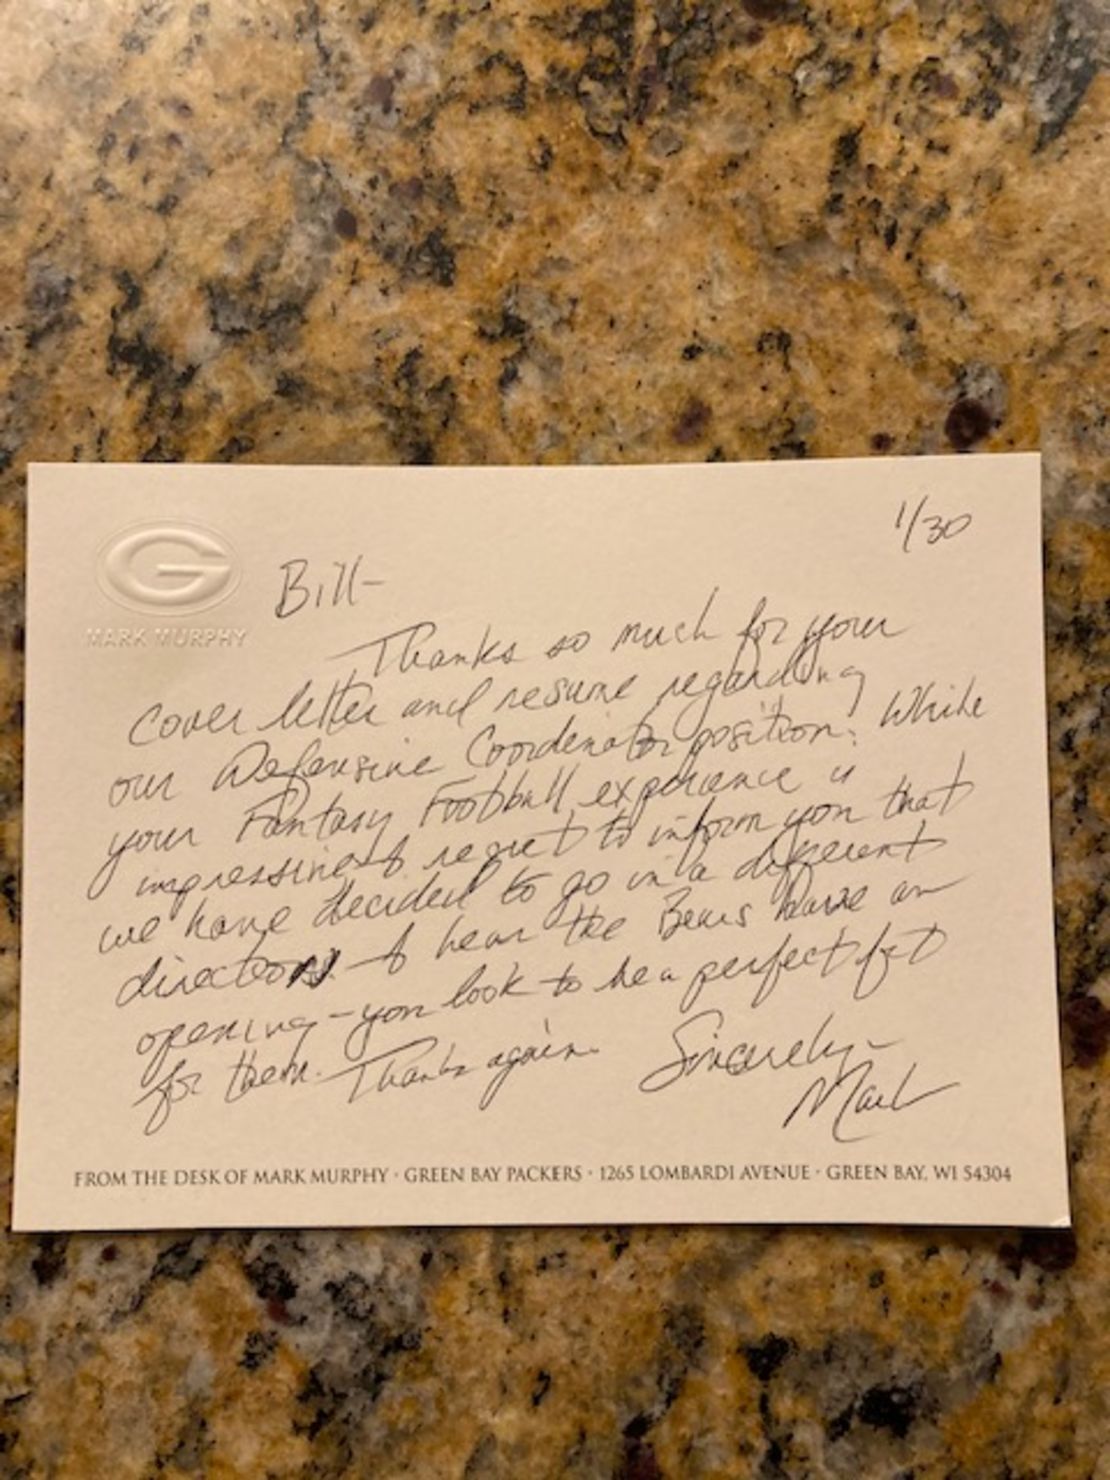 A hand-written letter to Bill Port from Green Bay Packers President and CEO Mark Murphy.